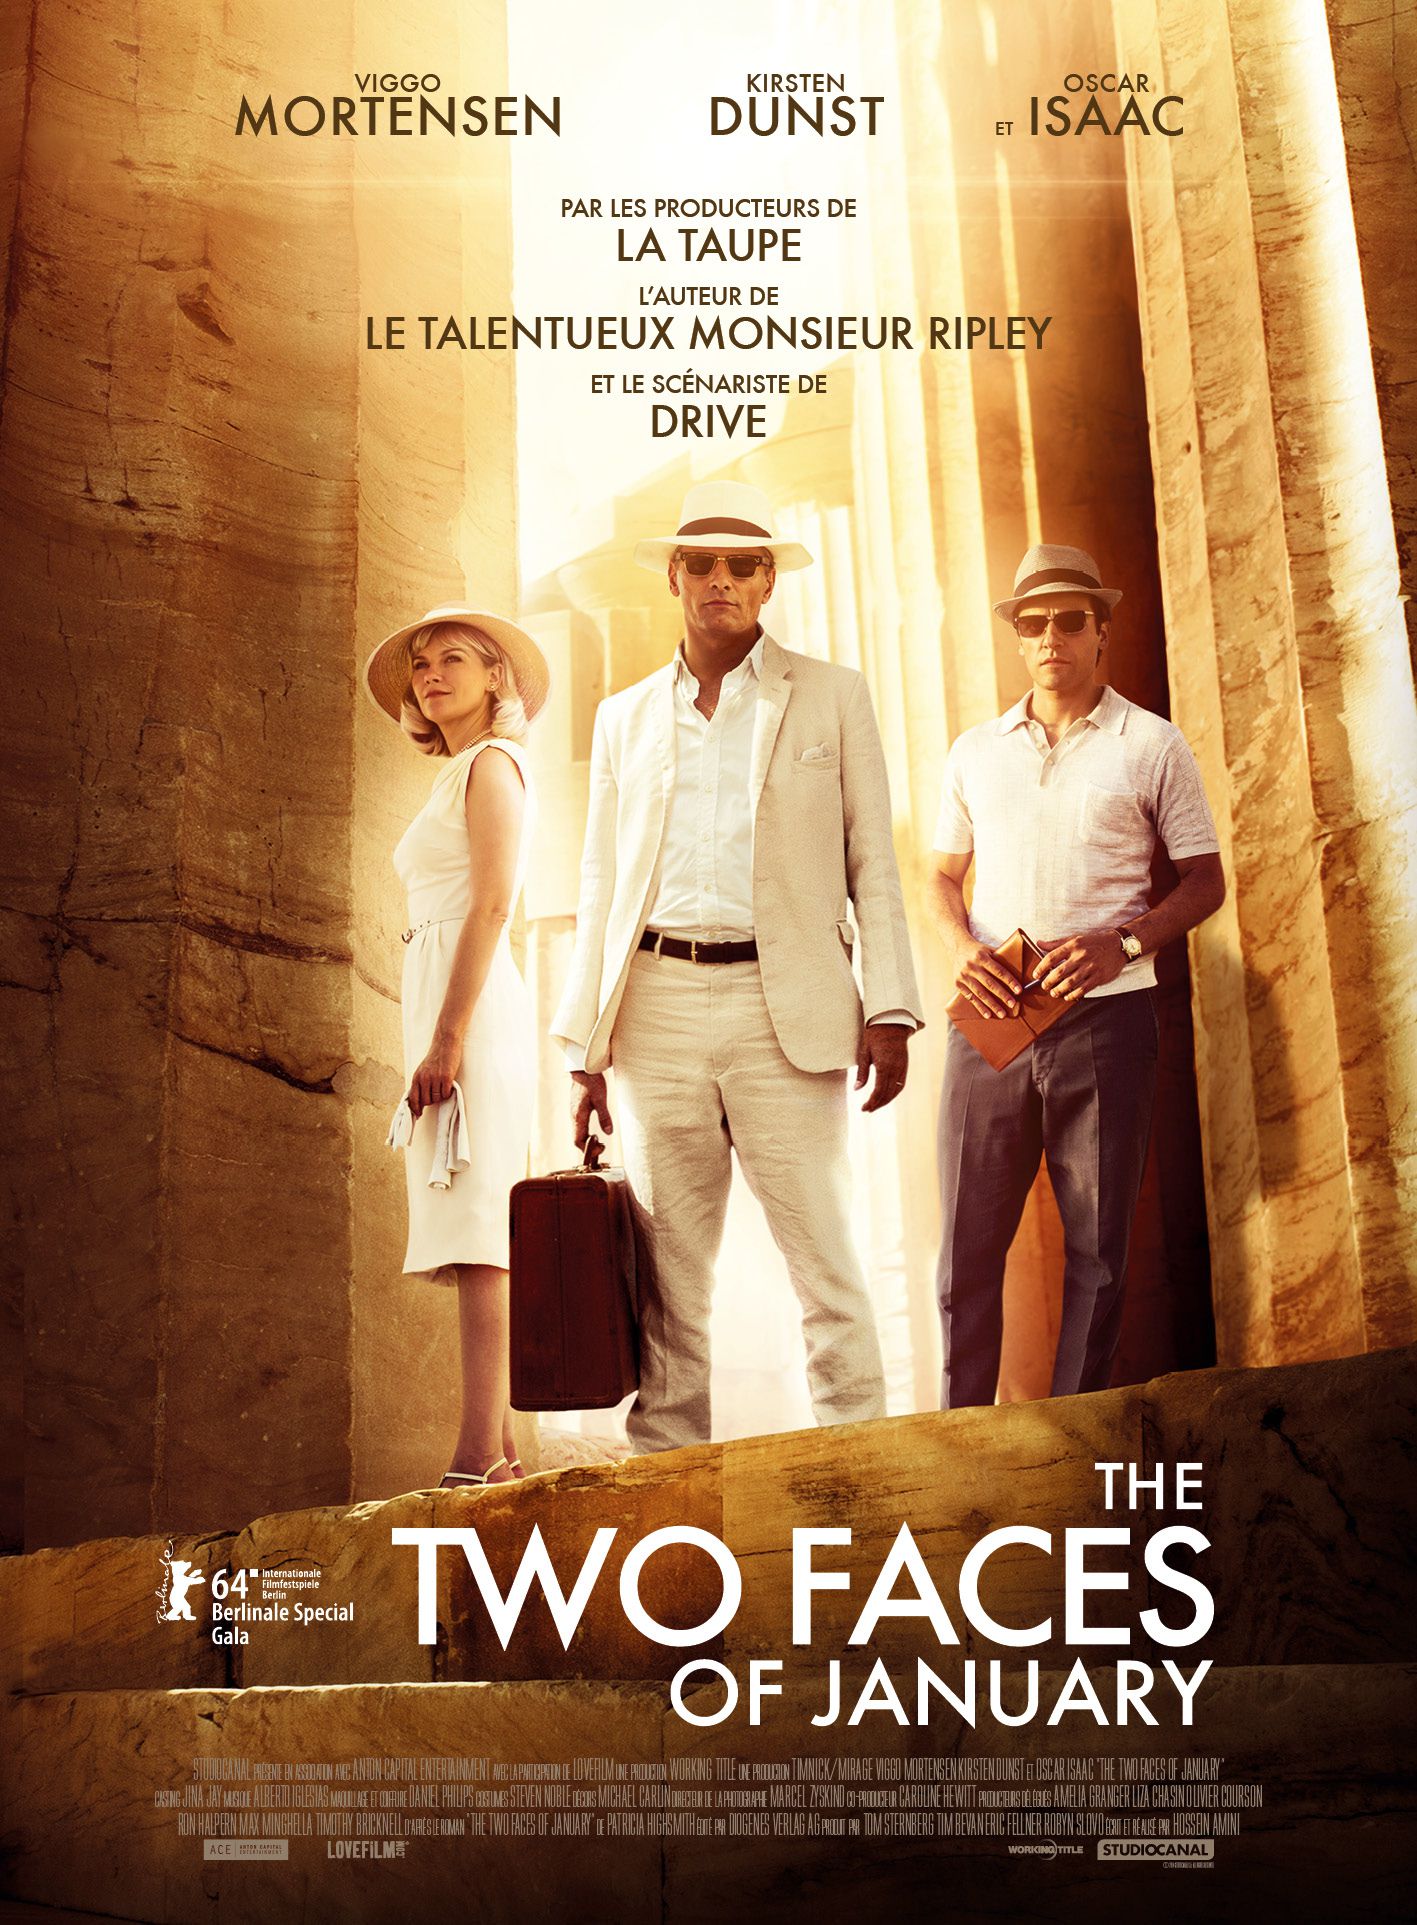 The Two Faces of January - Film (2014) streaming VF gratuit complet